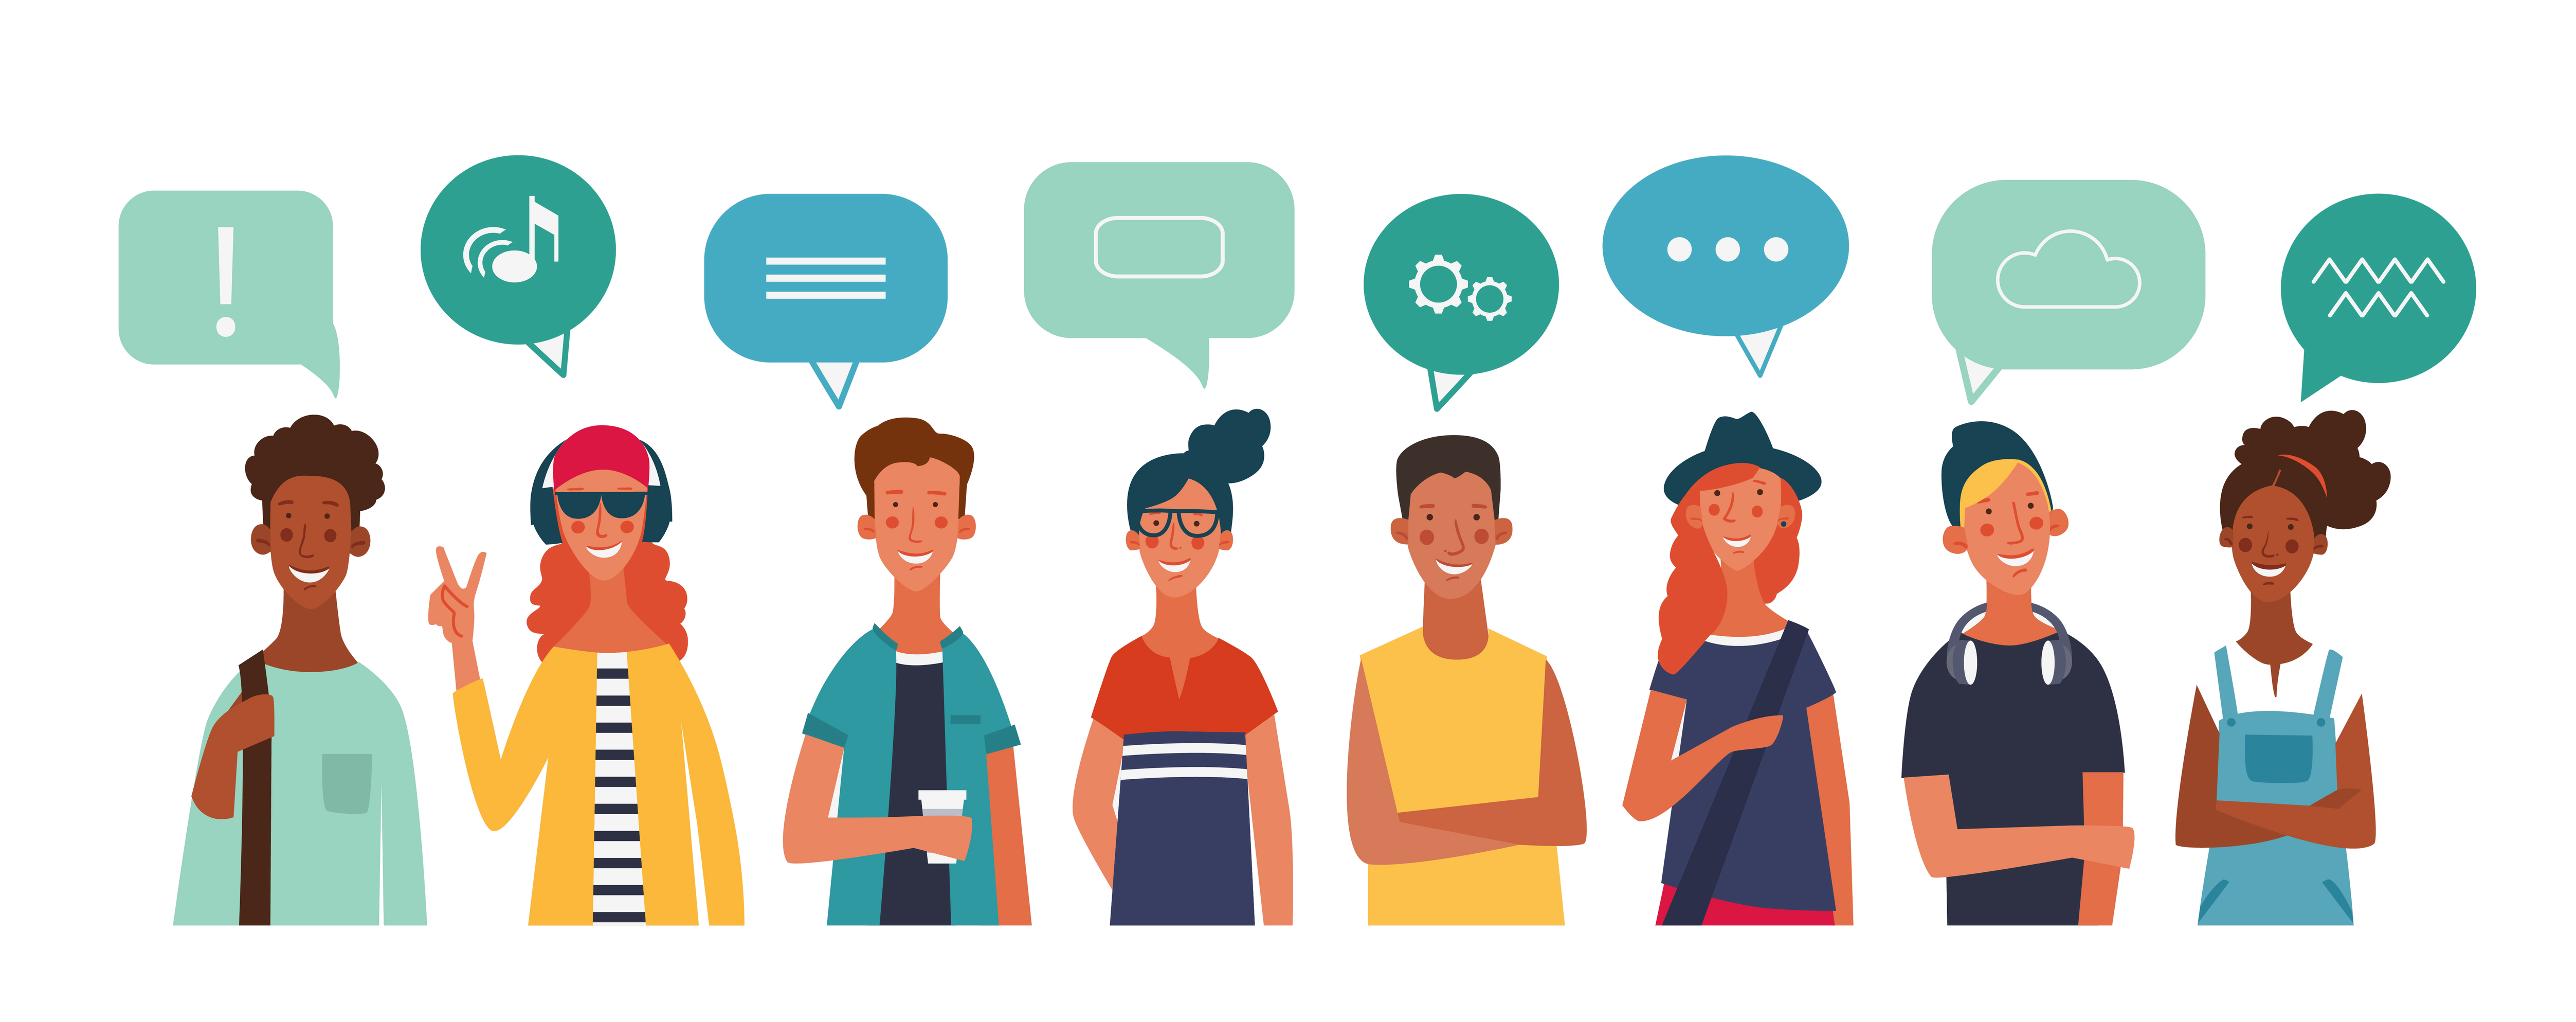 Illustration of a group of diverse young people with colorful dialog speech bubbles. 